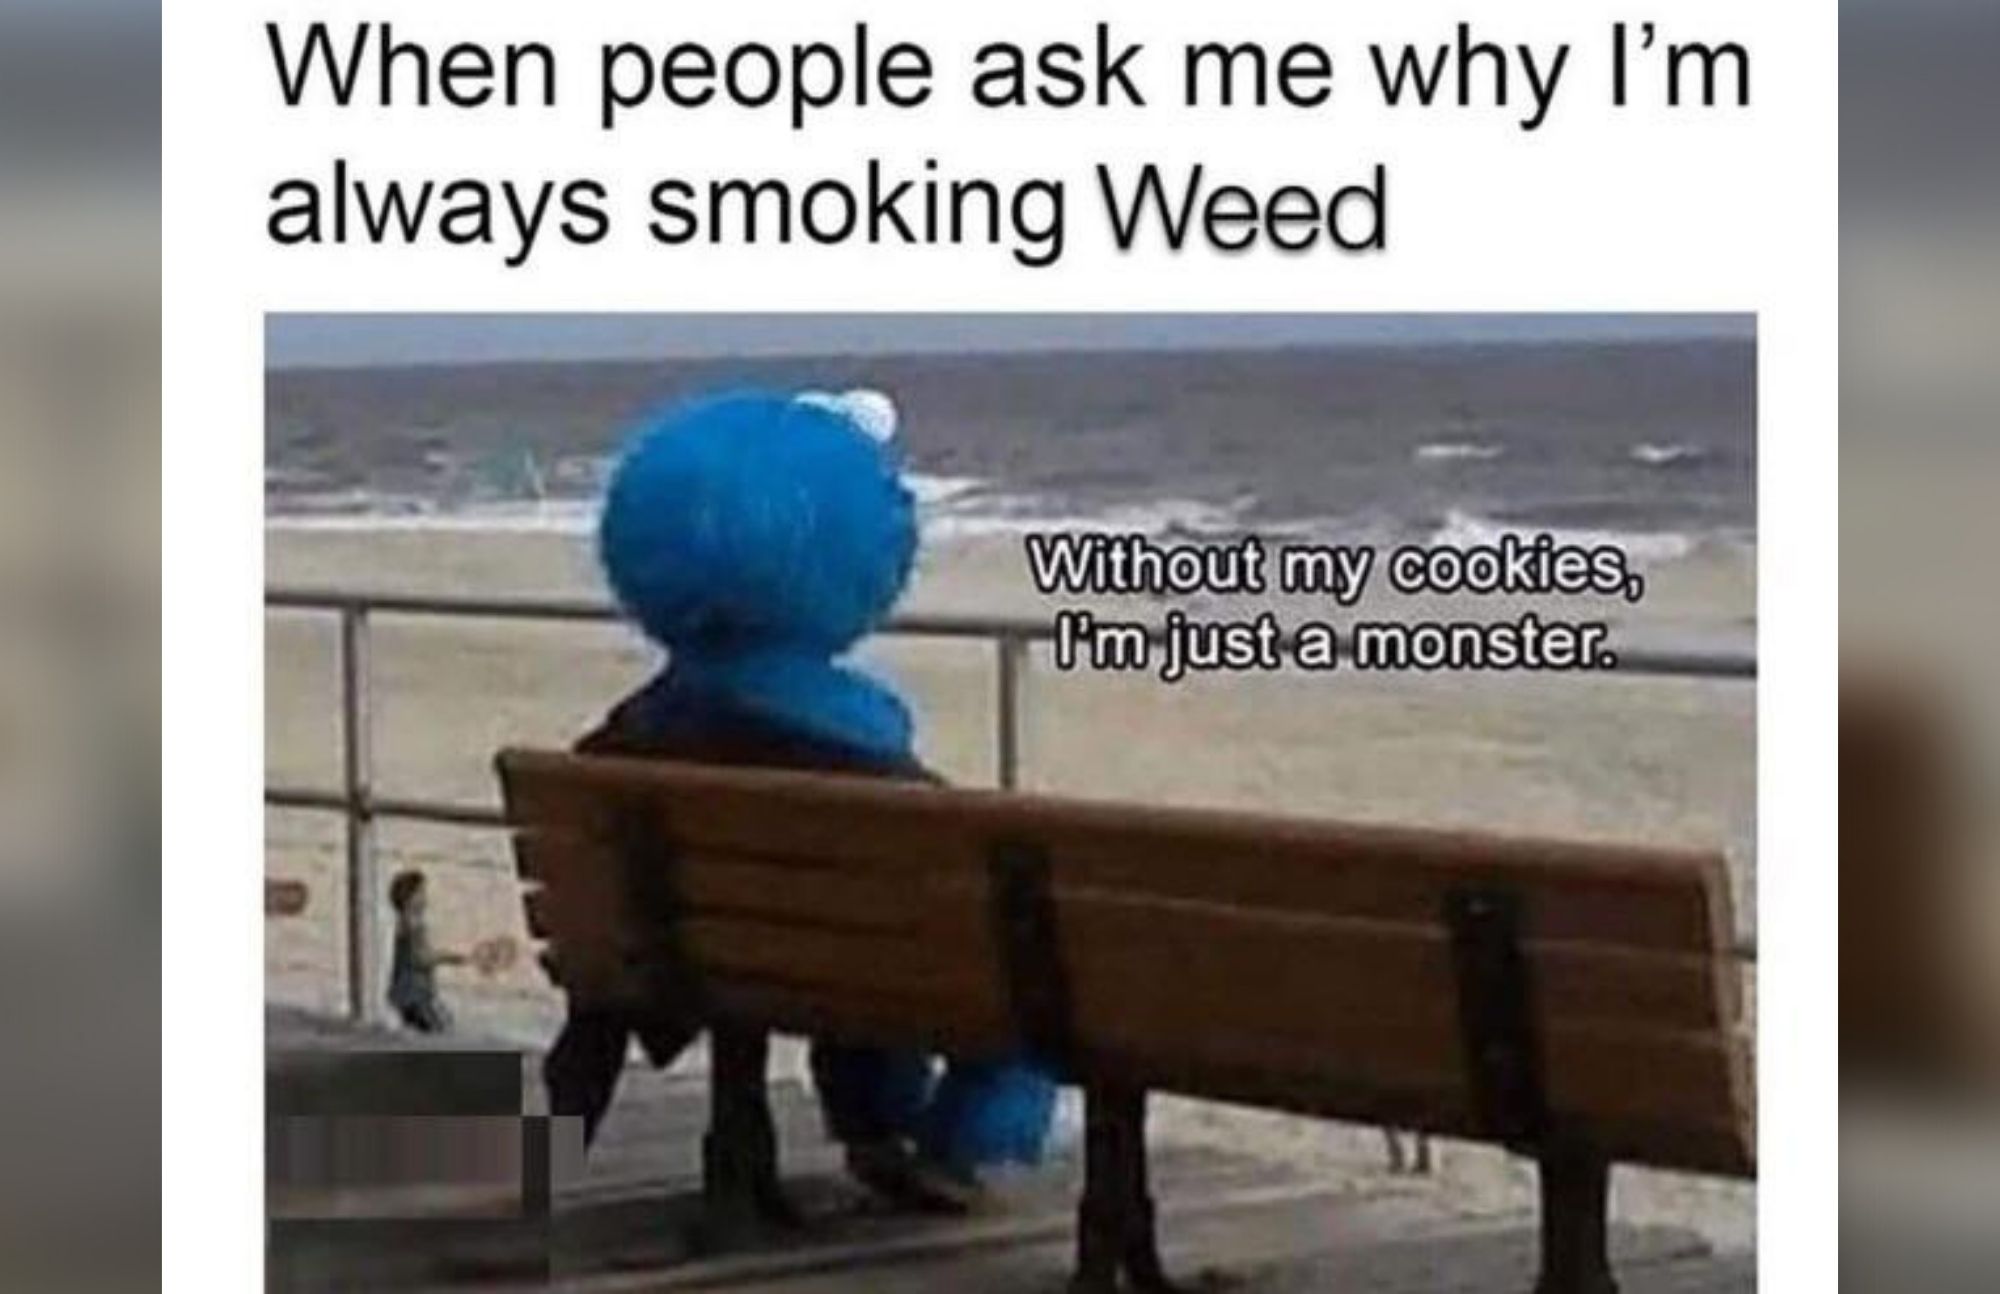 Cookie monster is sitting and in front him is a beach with a meme saying: "When people ask me why I'm always smoking weeds"